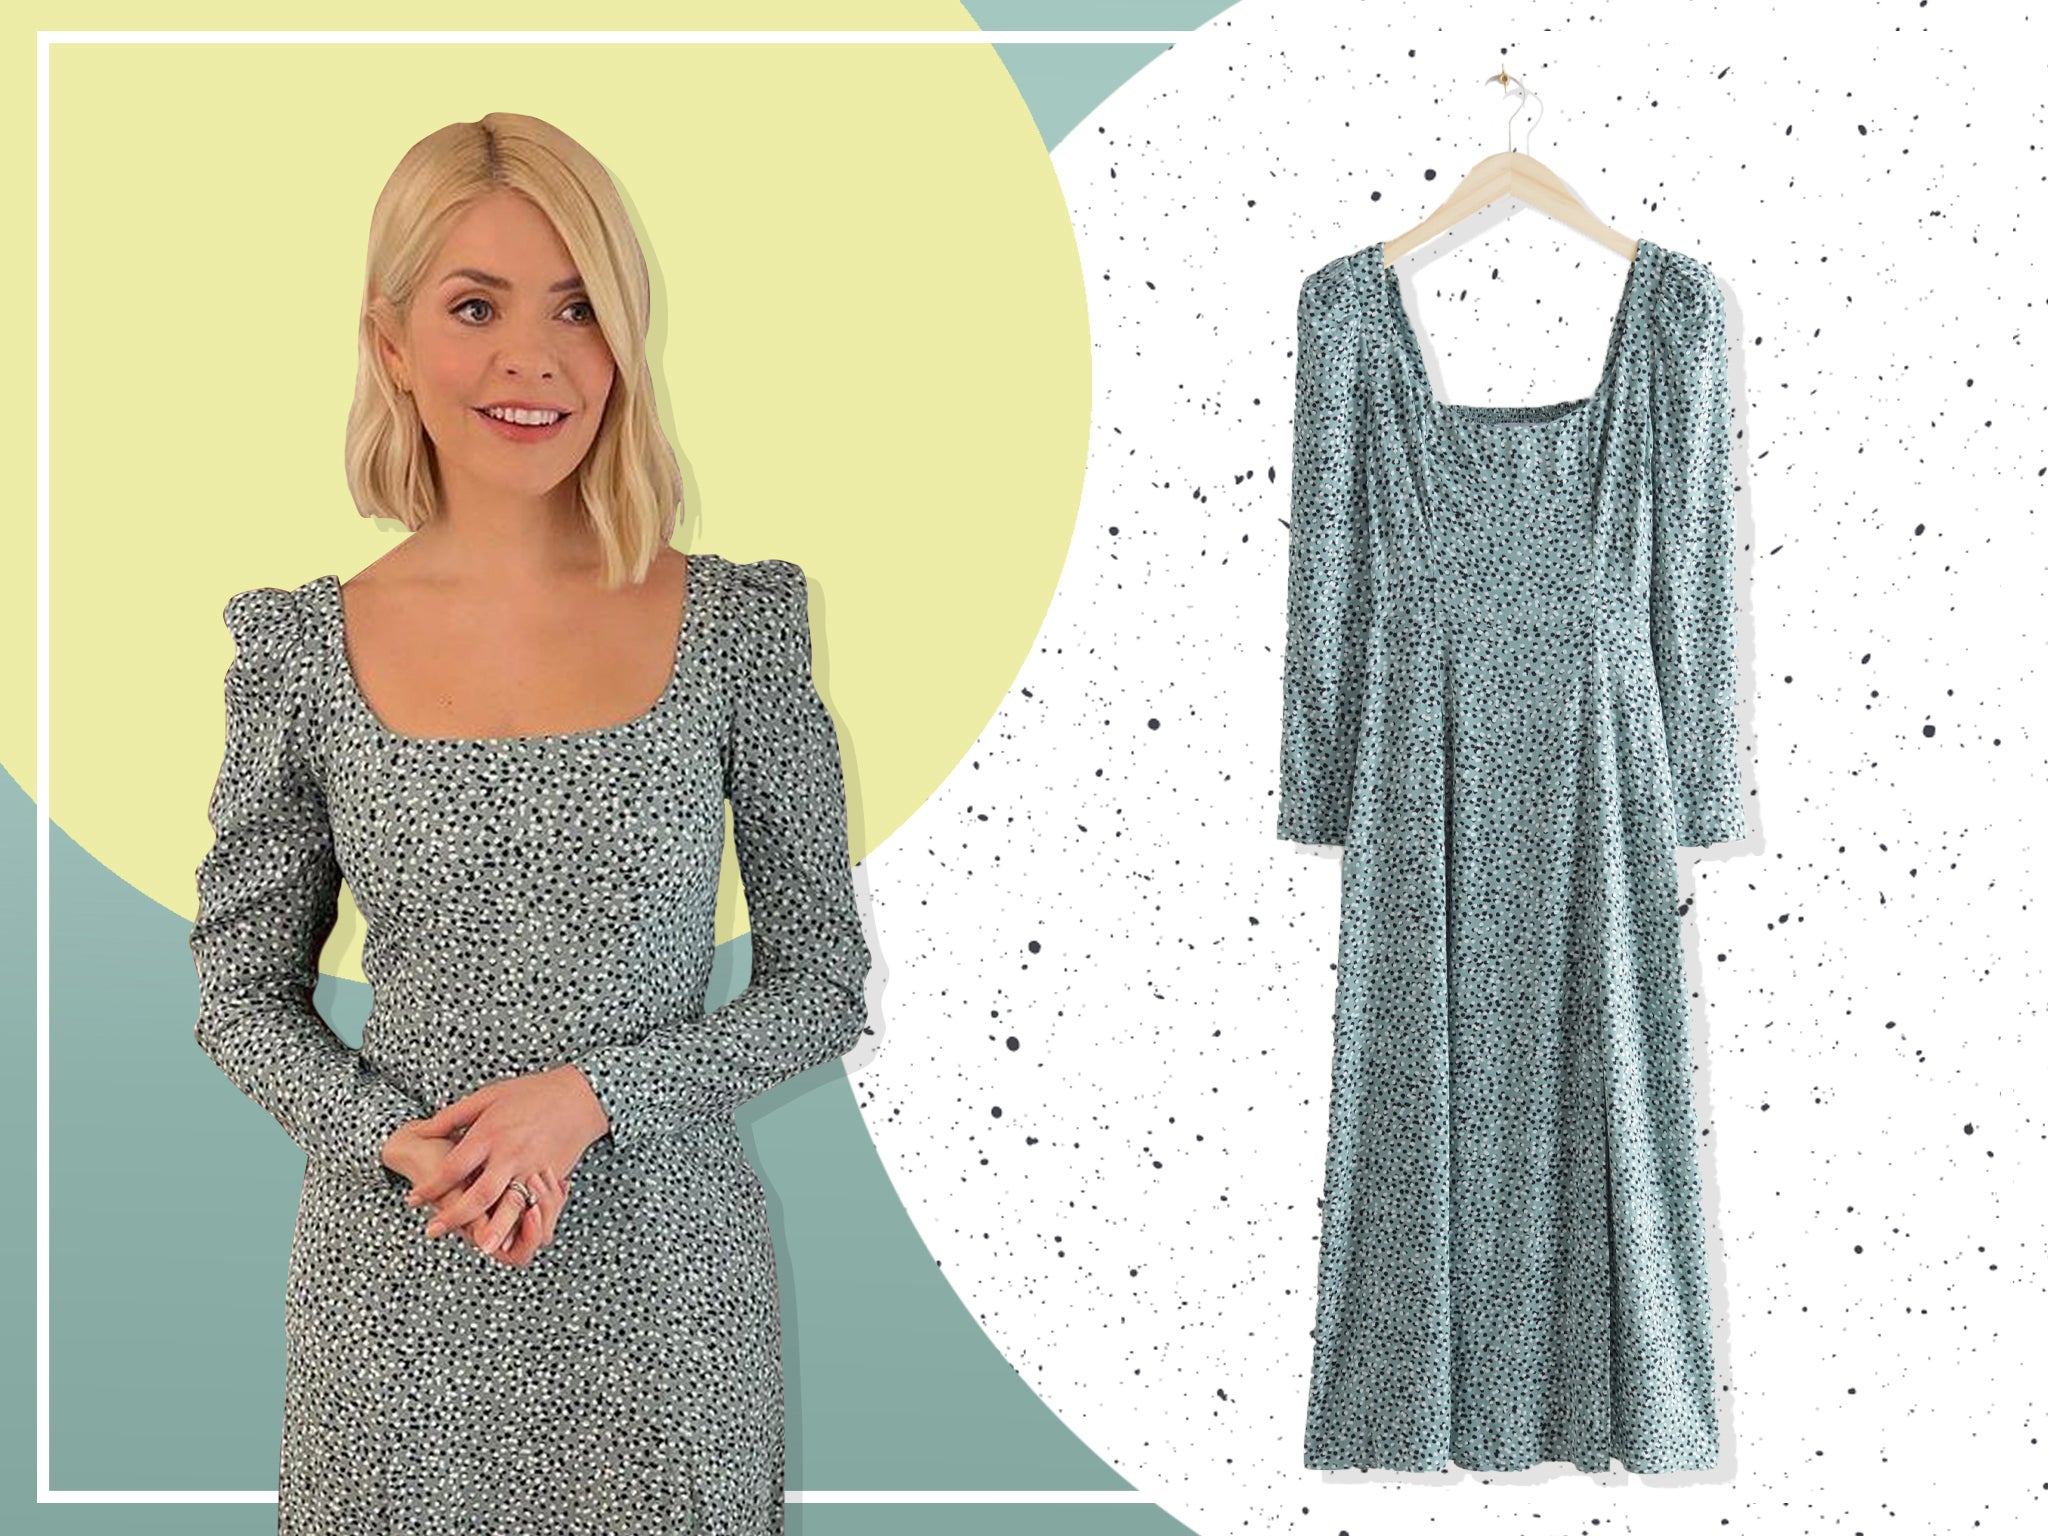 Holly Willoughby's dress: Shop the midi dress